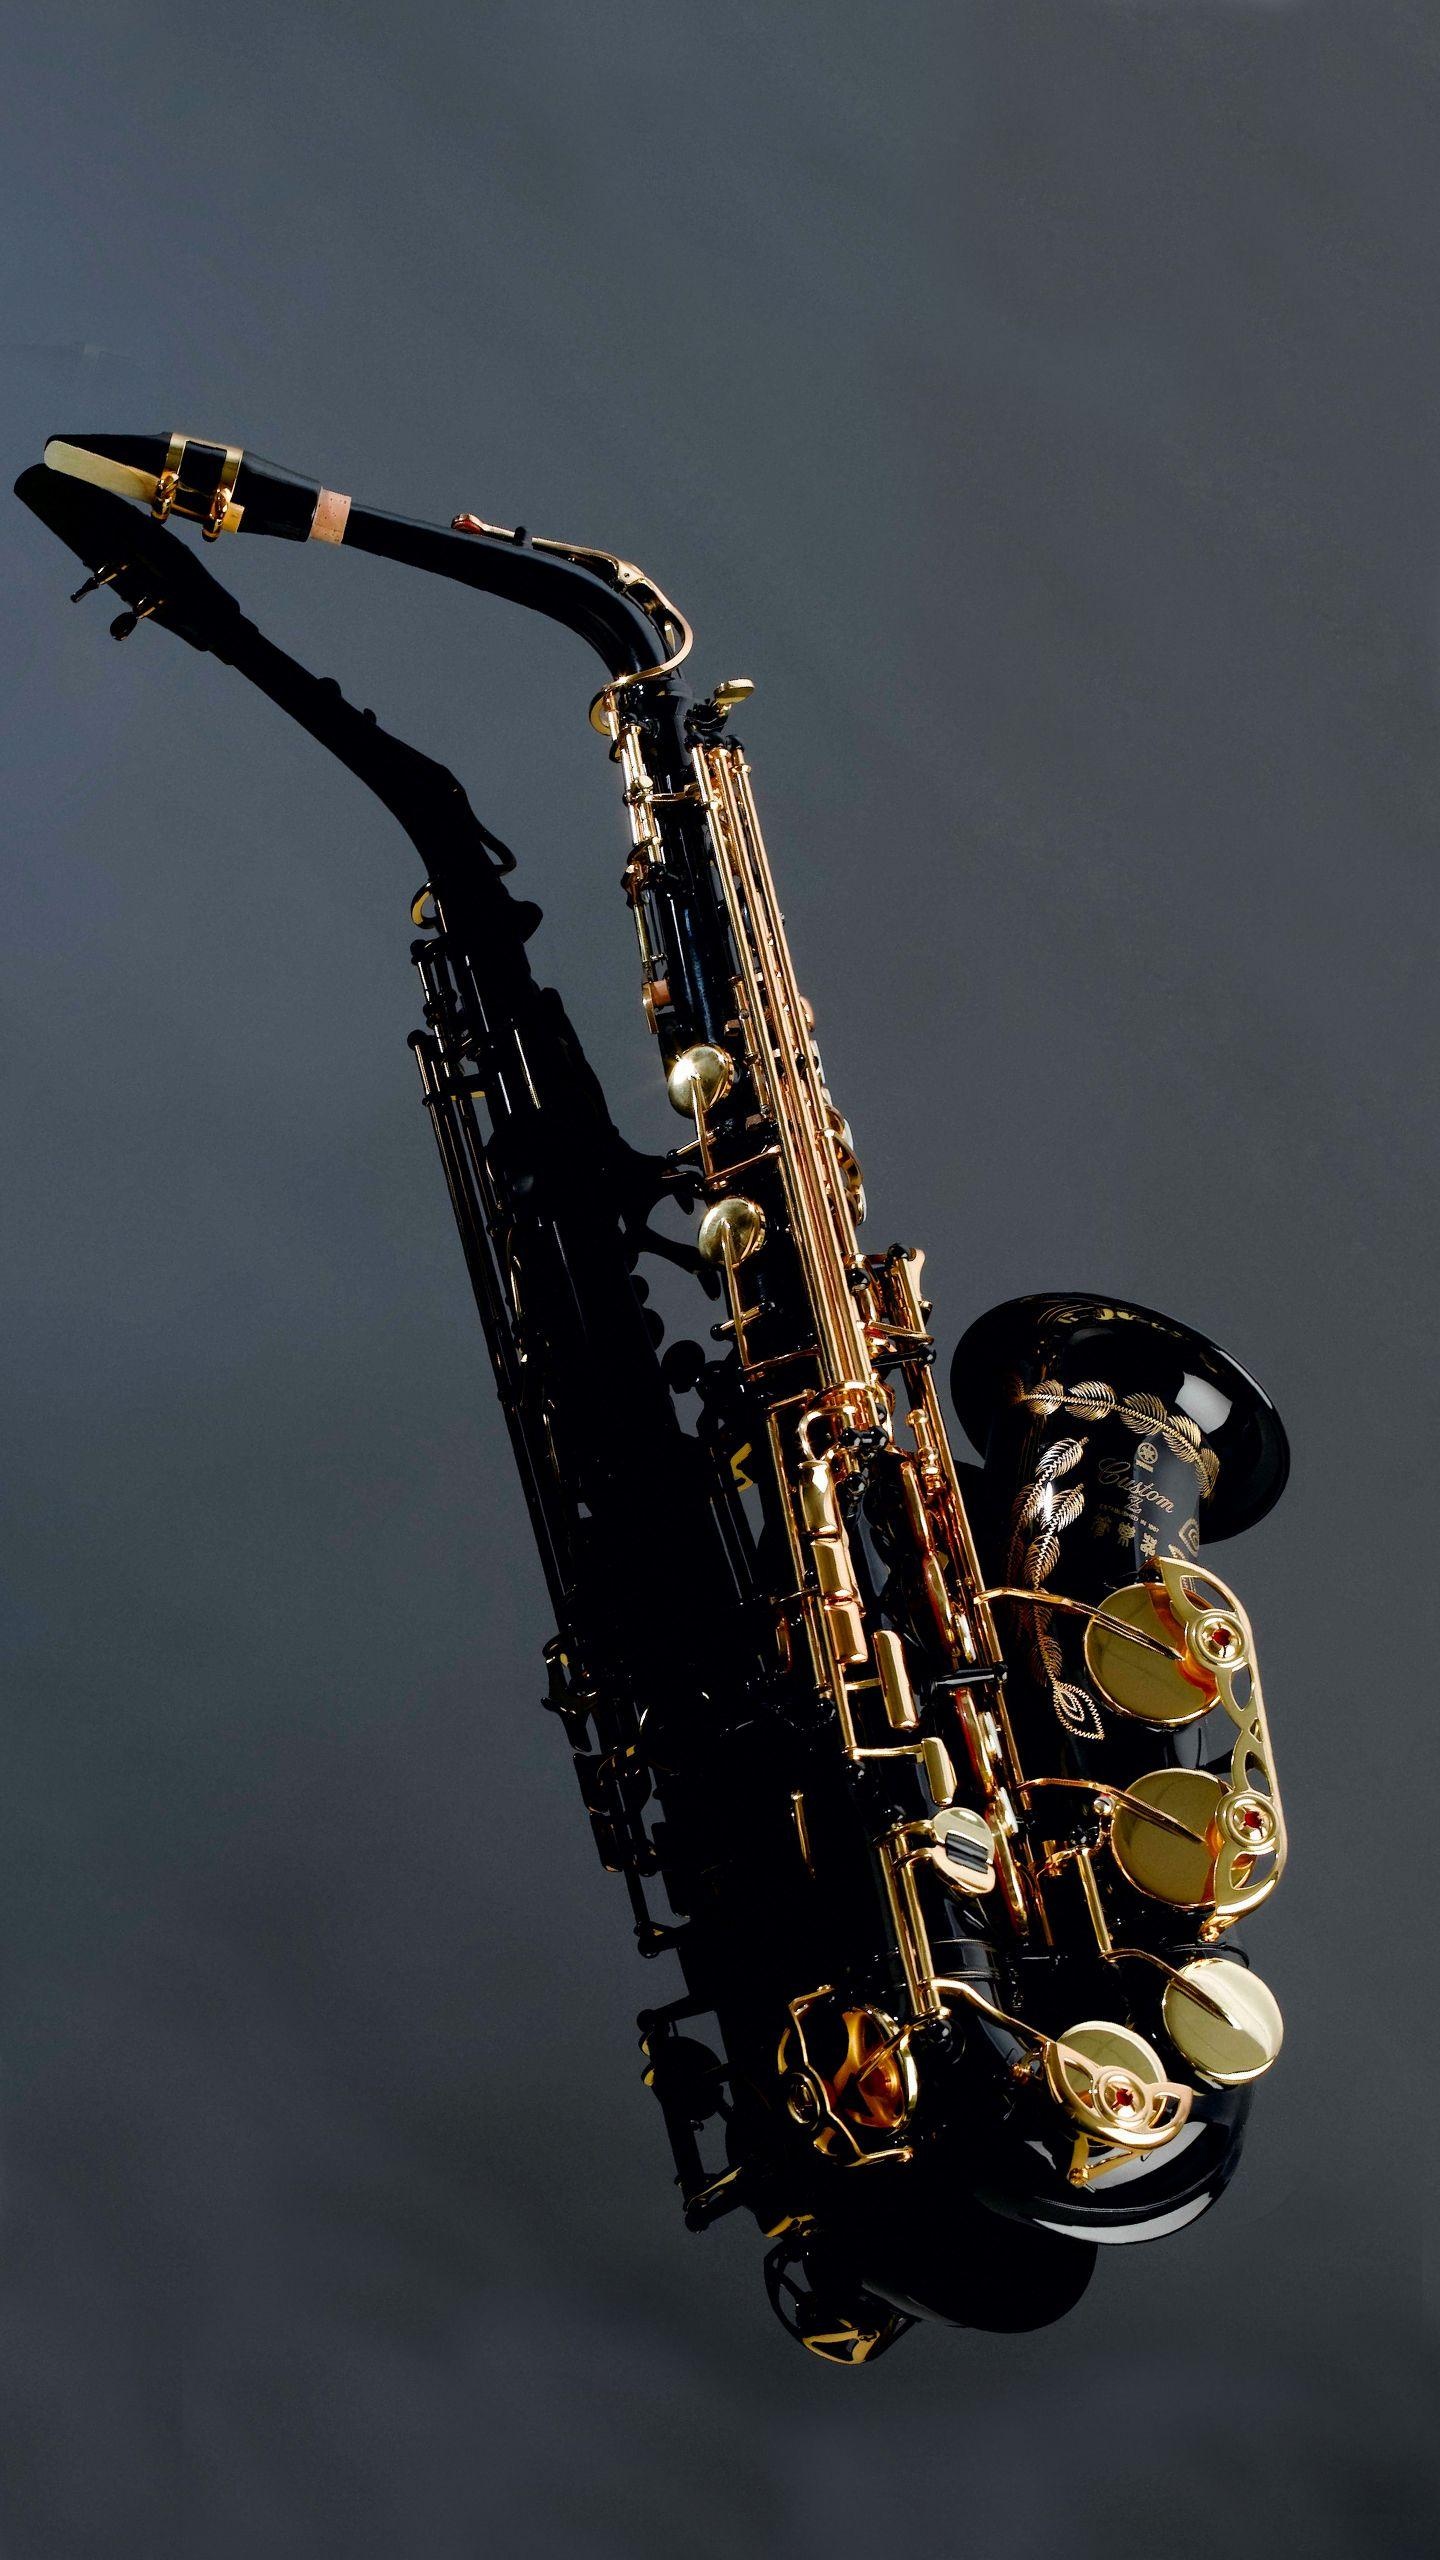 Saxophone: A musical instrument played by blowing into a mouthpiece and pressing keys with fingers. 1440x2560 HD Wallpaper.